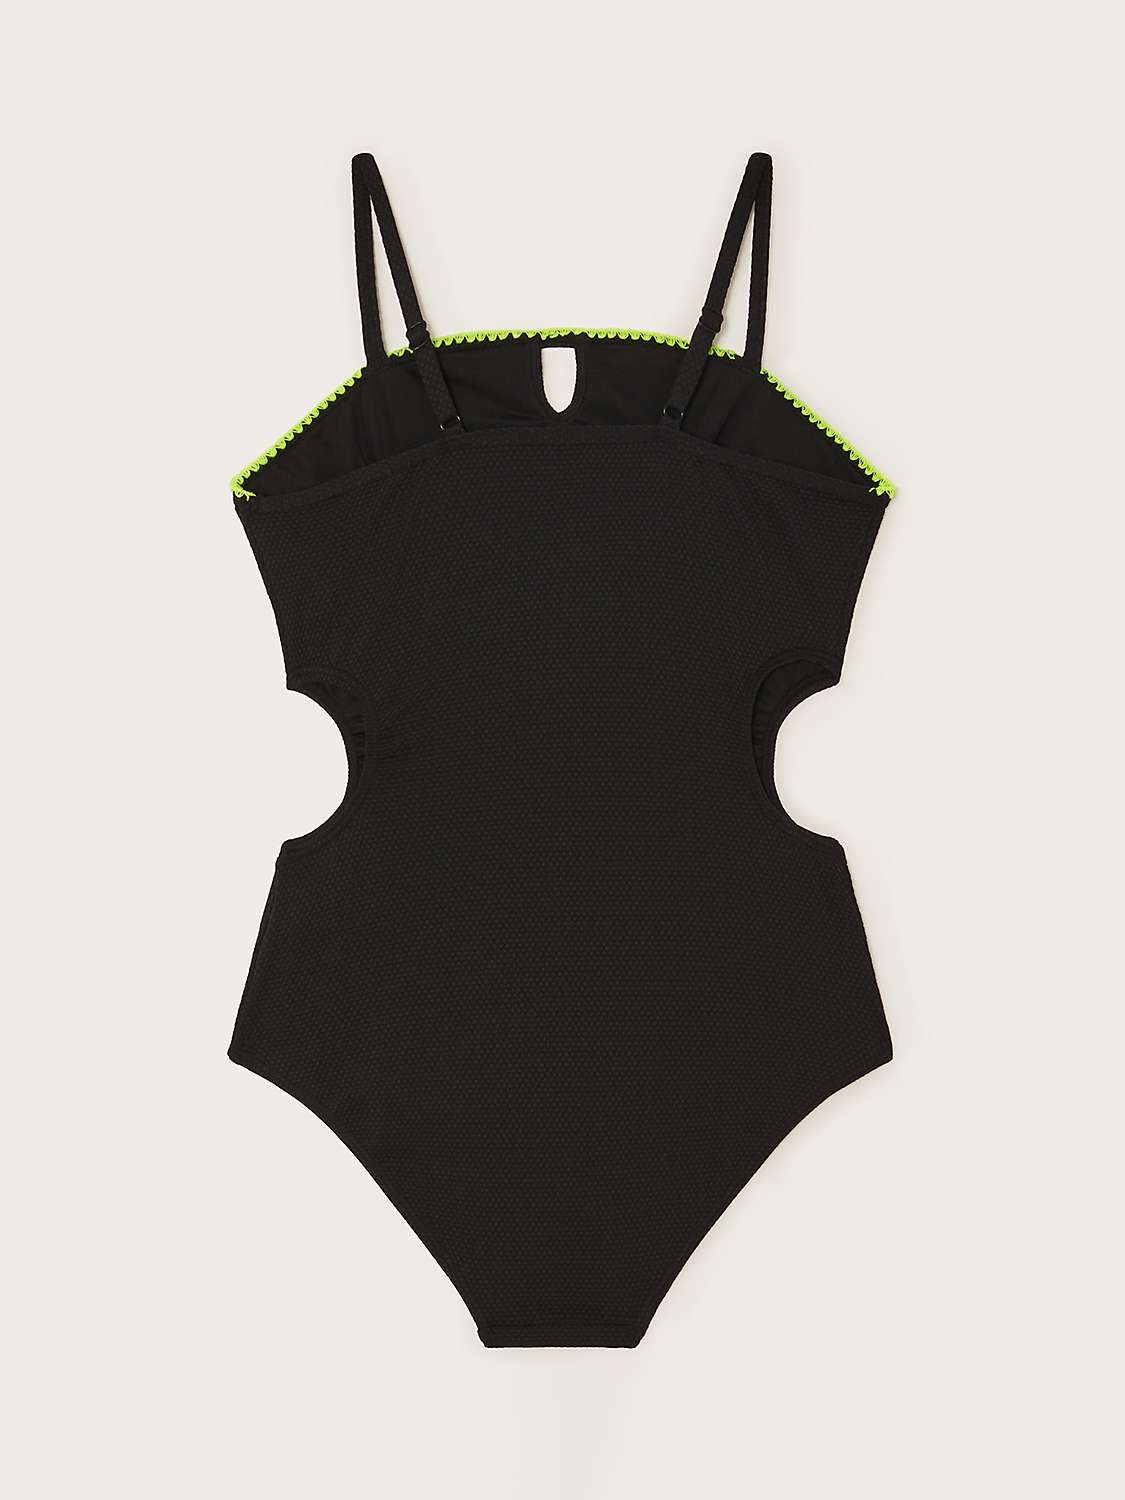 Buy Monsoon Kids' Storm Textured Cut Out Swimsuit, Black Online at johnlewis.com